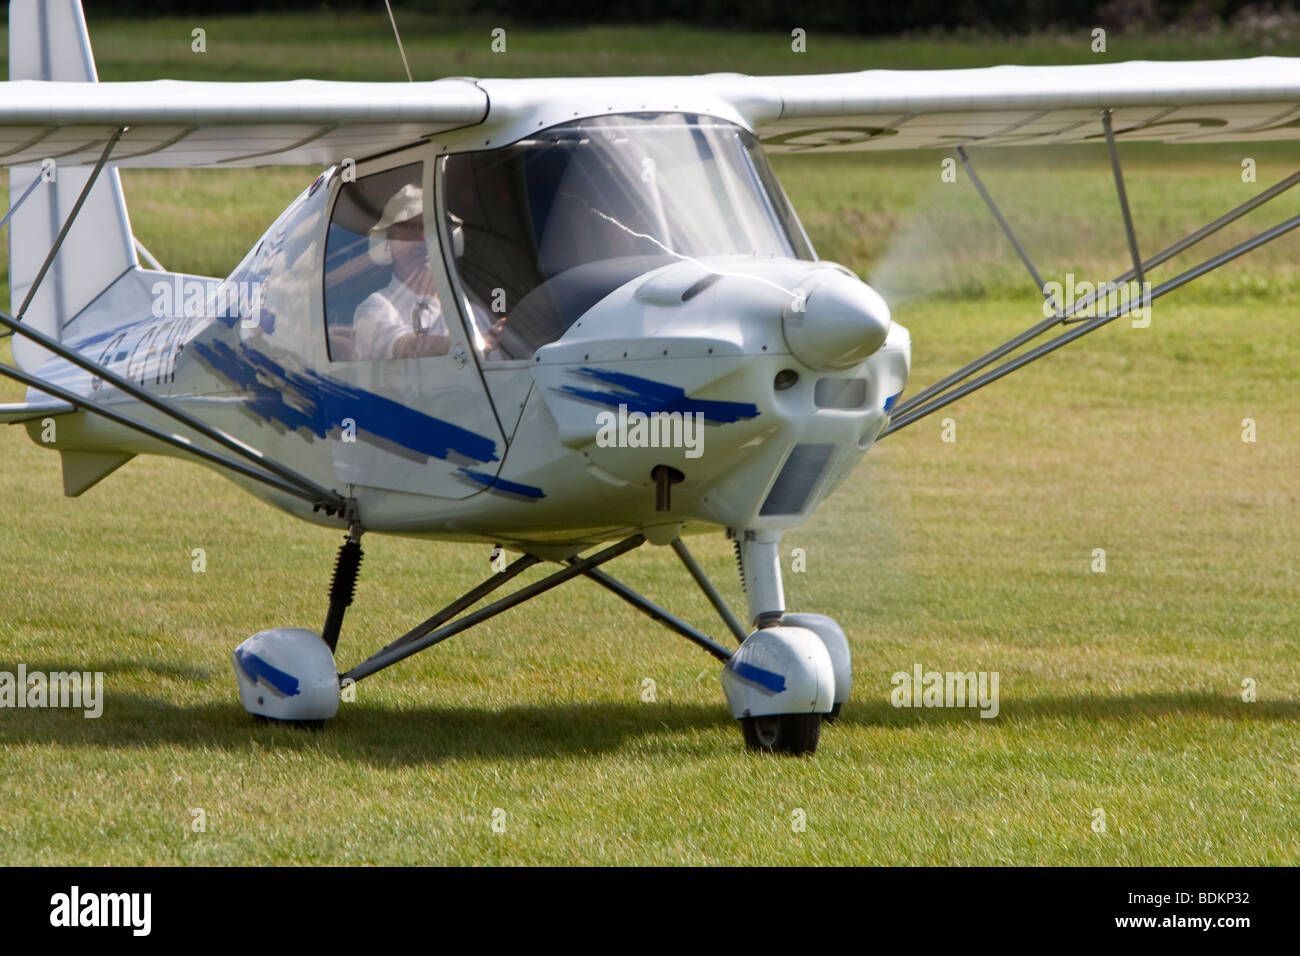 Ikarus C42 ultralight aircraft at a grass airfield in the UK Stock Photo -  Alamy